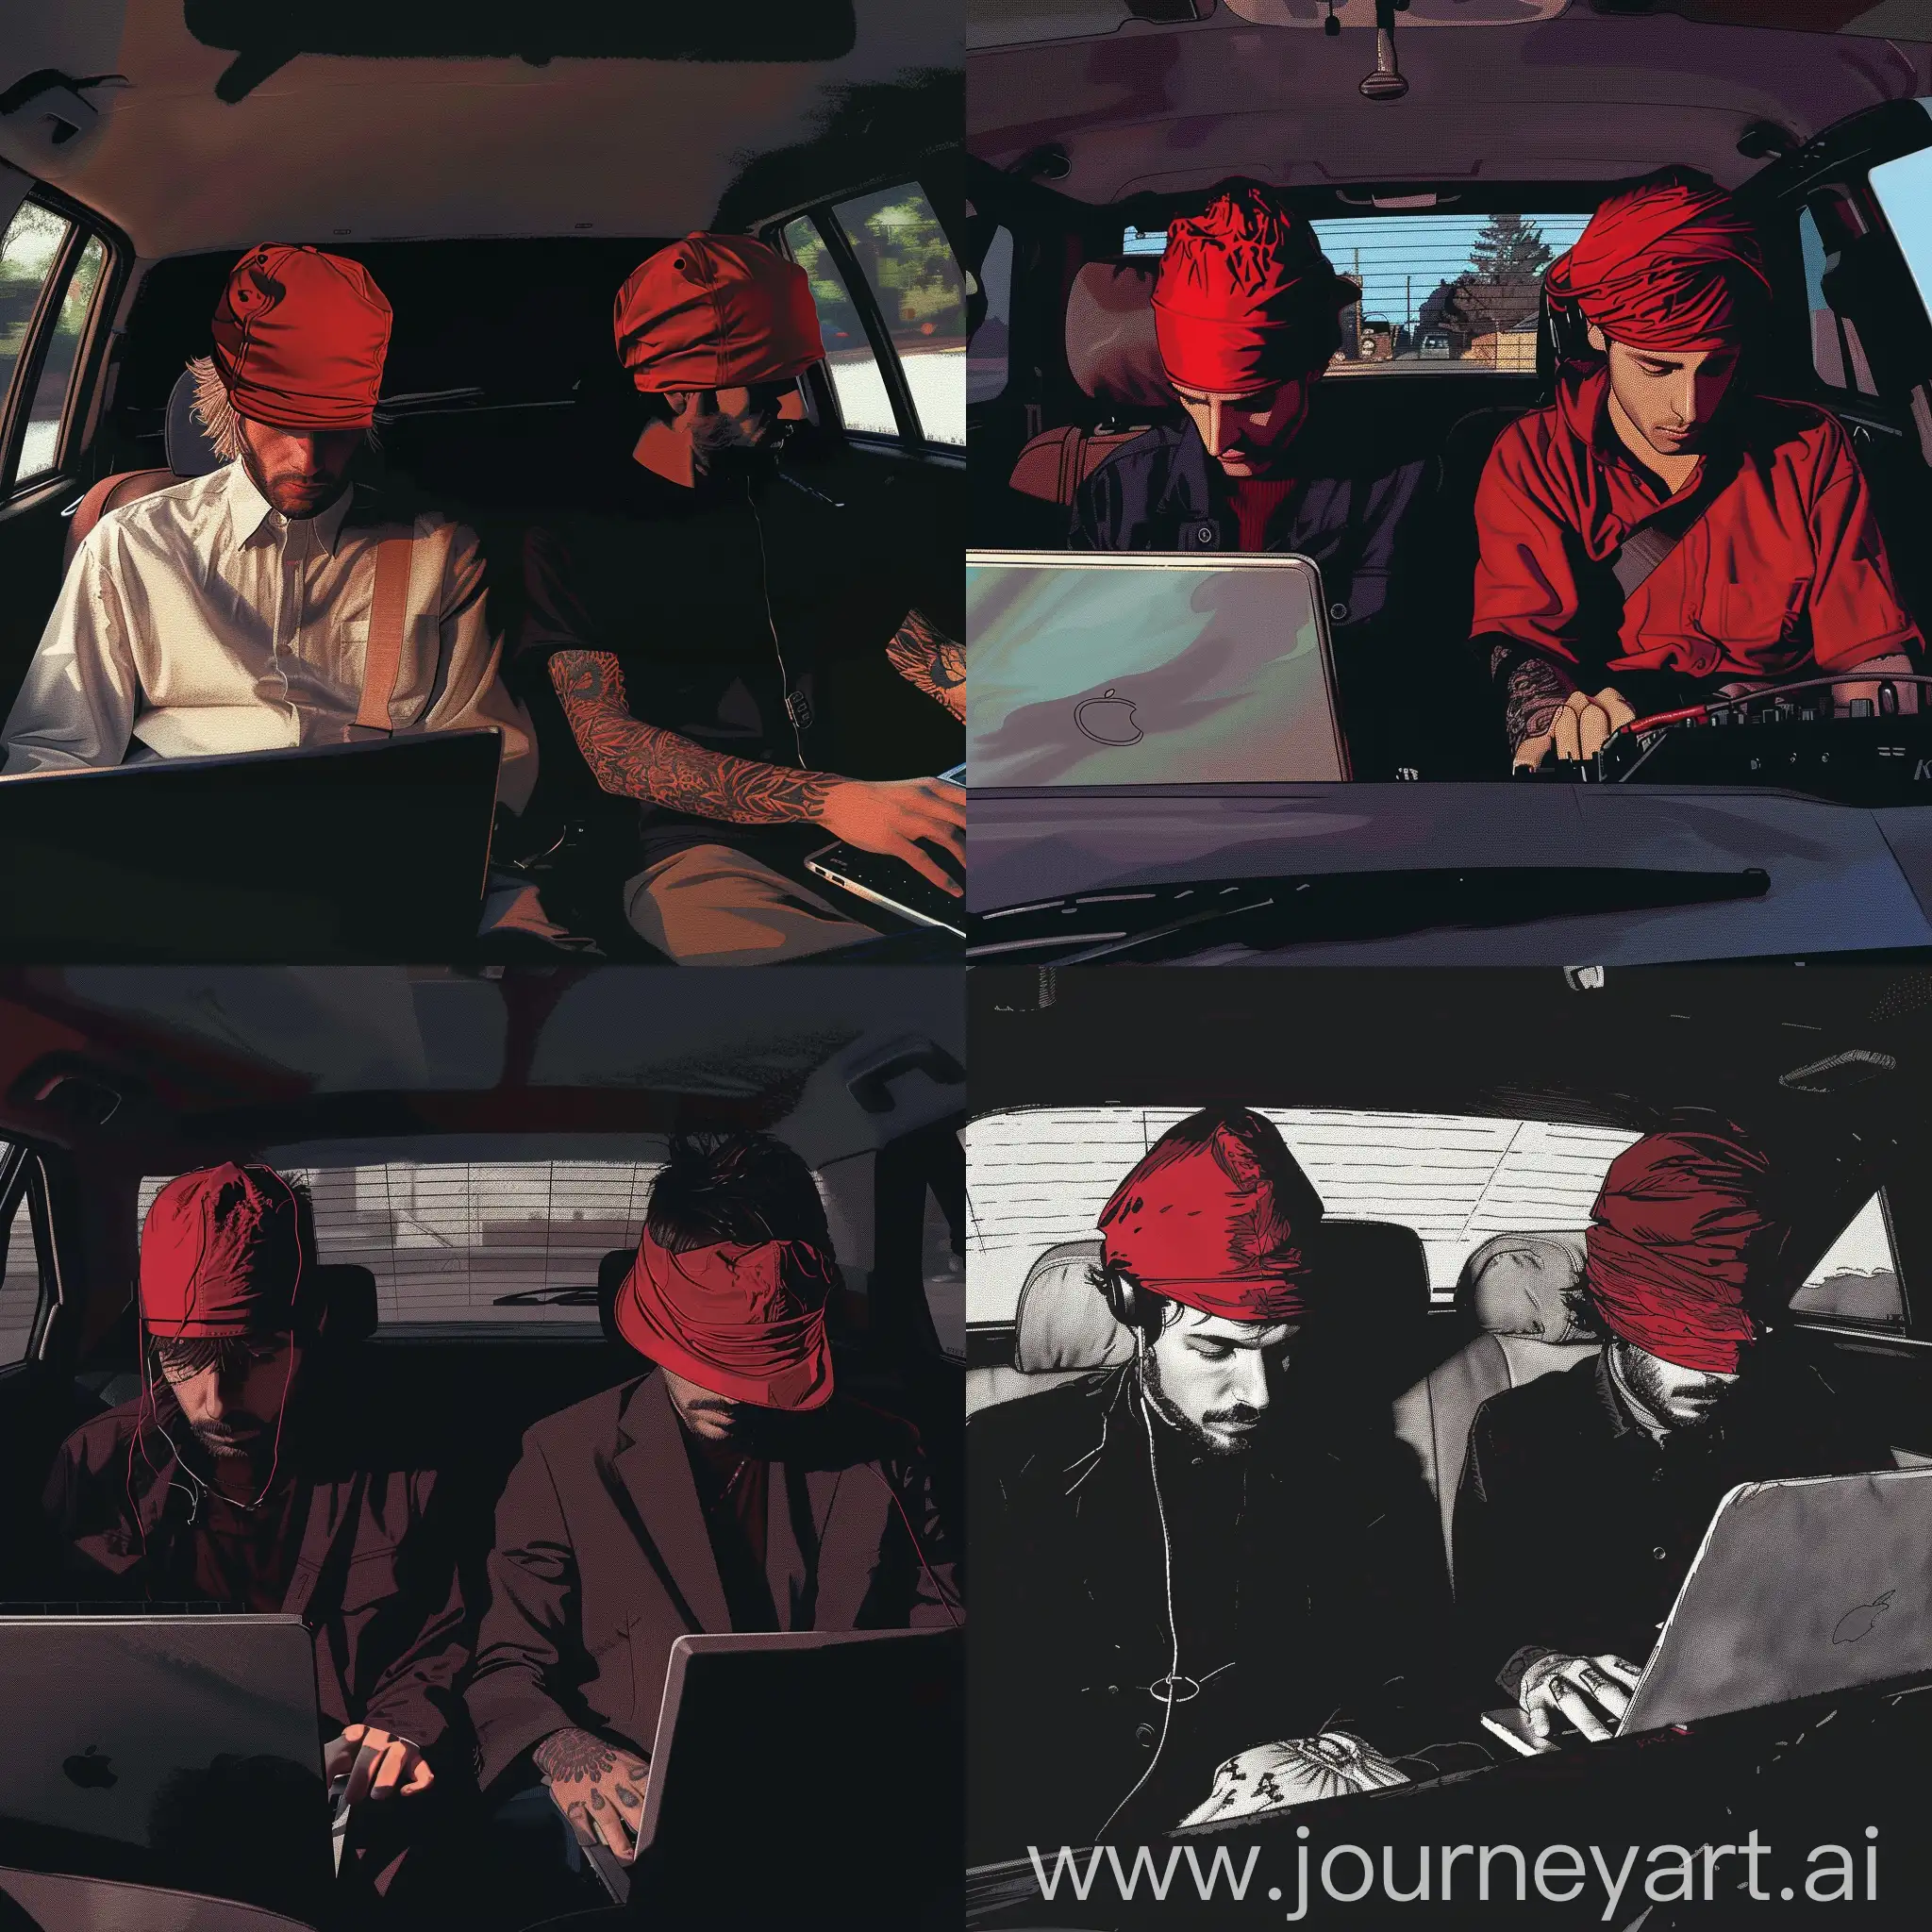 Two-Men-Making-Music-on-Laptop-in-Car-Drawn-Style-with-Tattooed-Hand